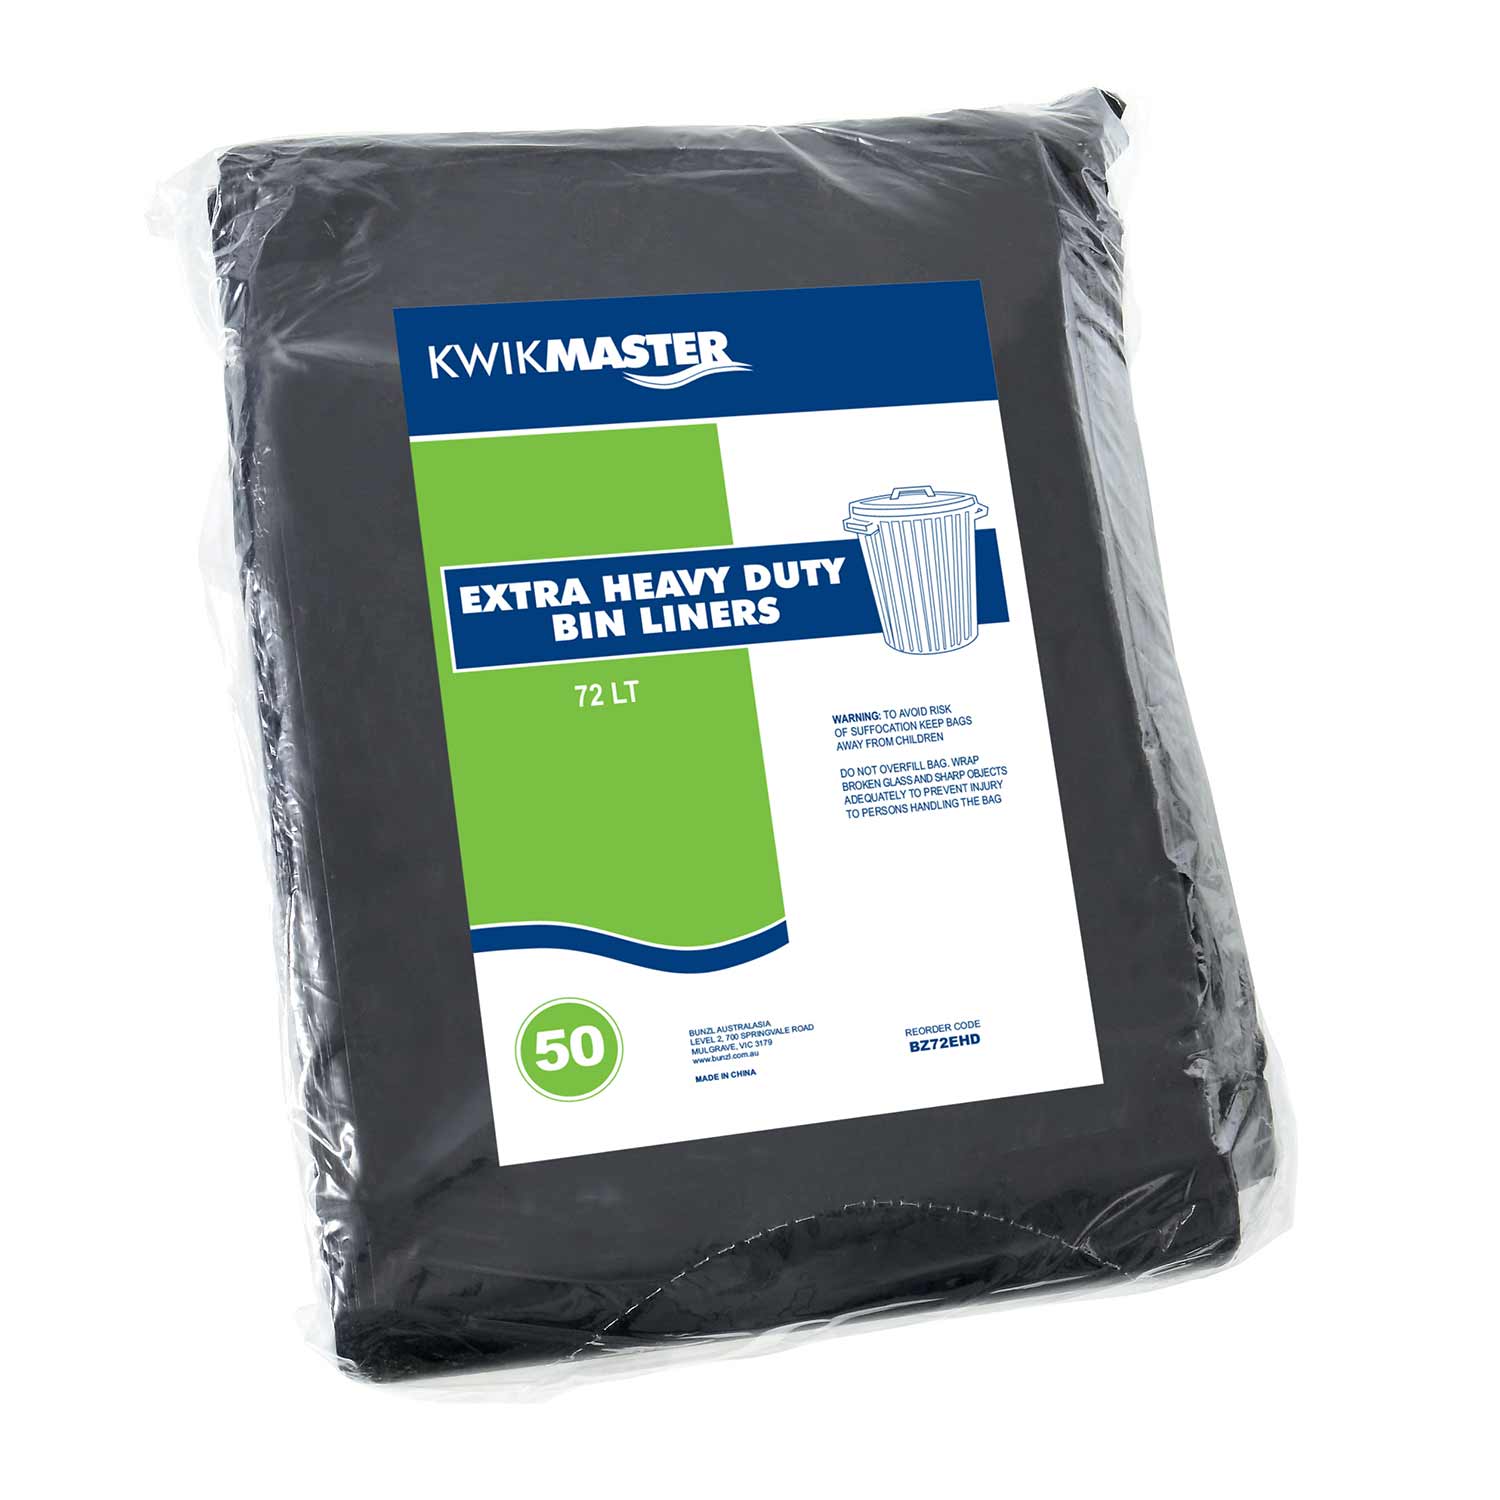 Kwikmaster Kwikmaster Bin Liner Extra Heavy Duty - CT/250 Cleaning Products  